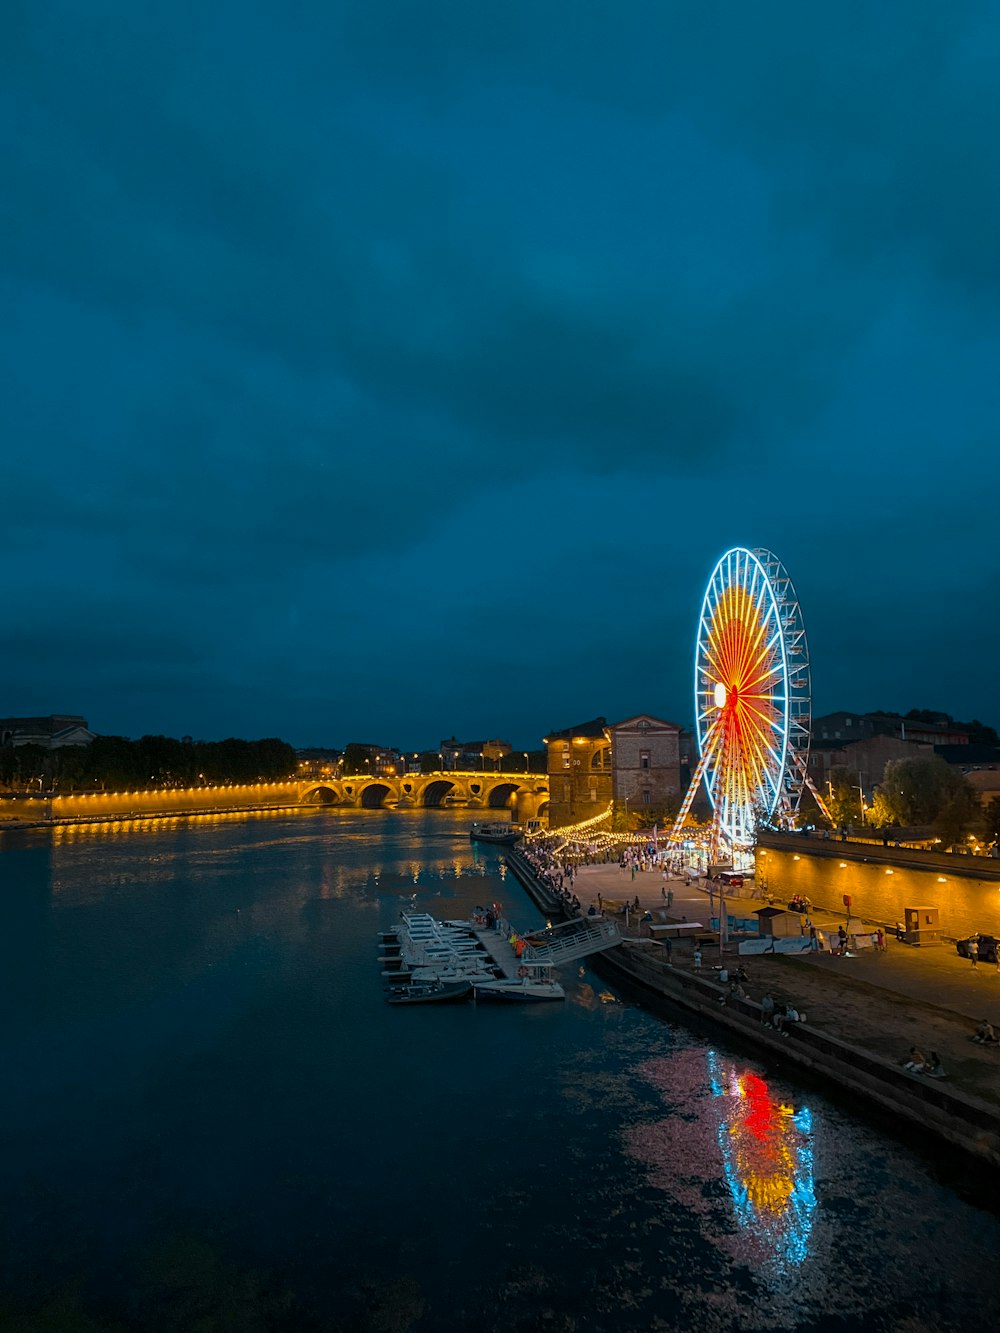 a ferris wheel sitting next to a river under a cloudy sky